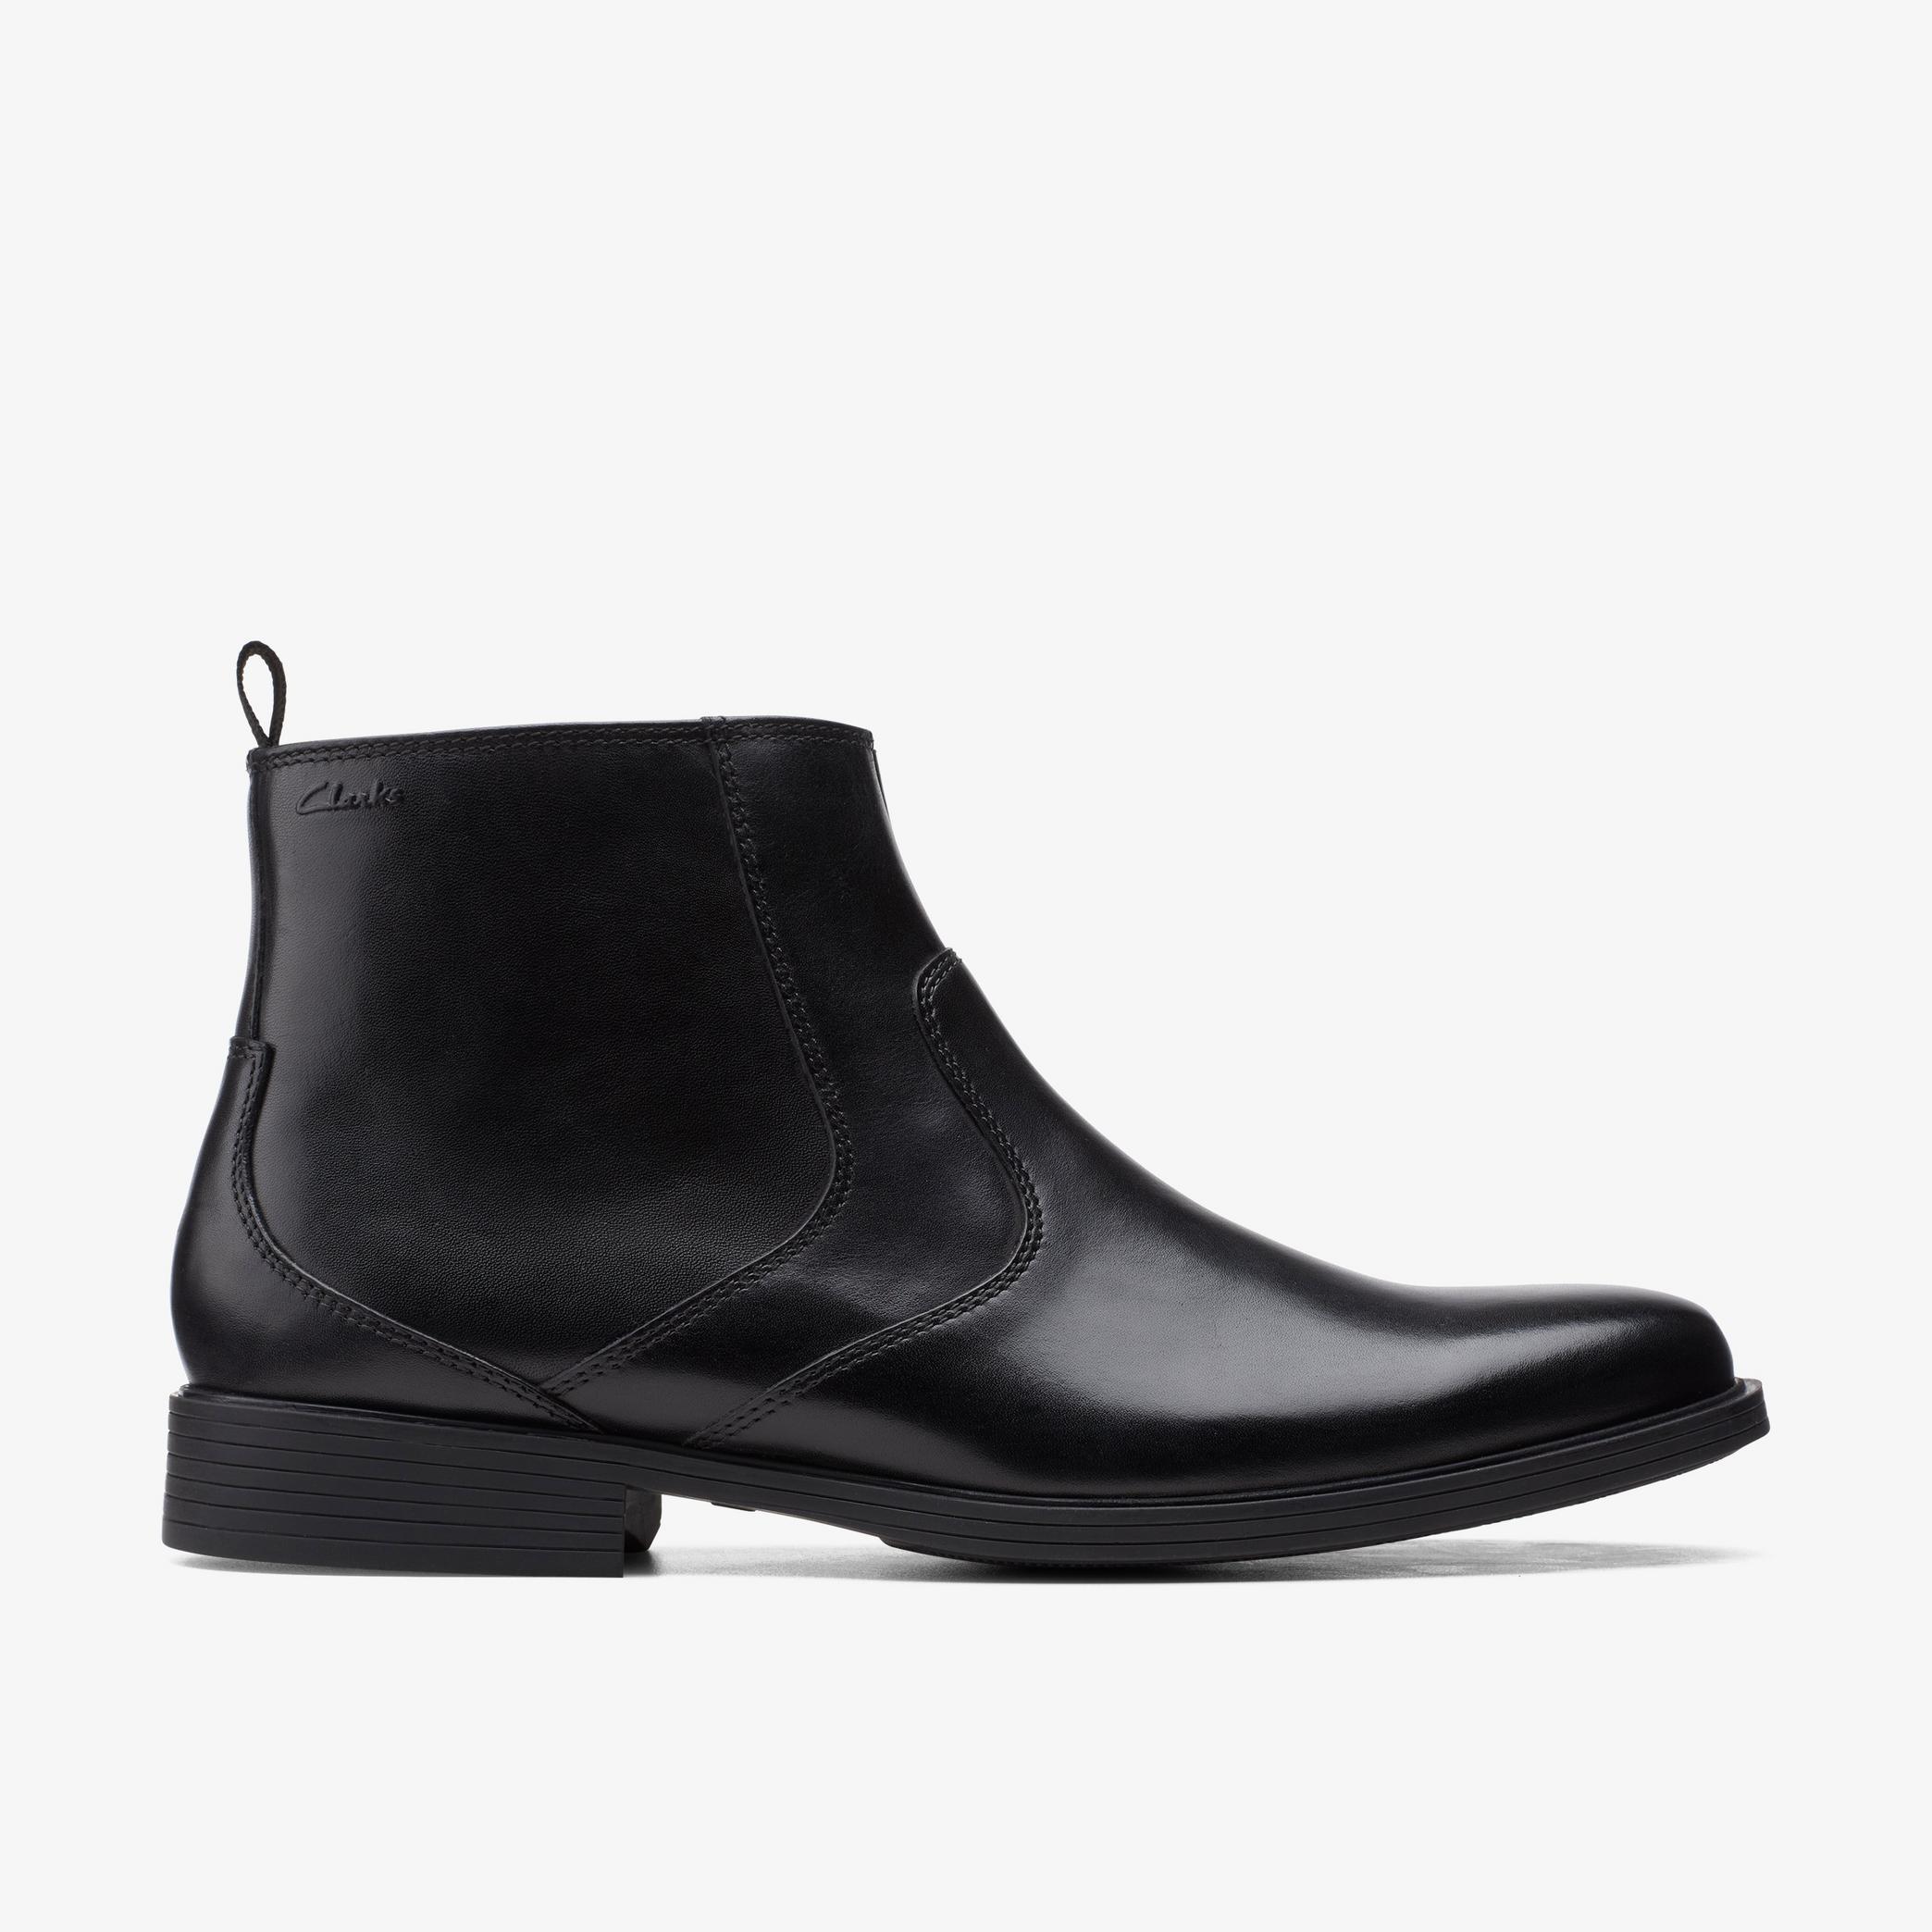 MENS Whiddon Zip Black Leather Ankle Boots | Clarks US